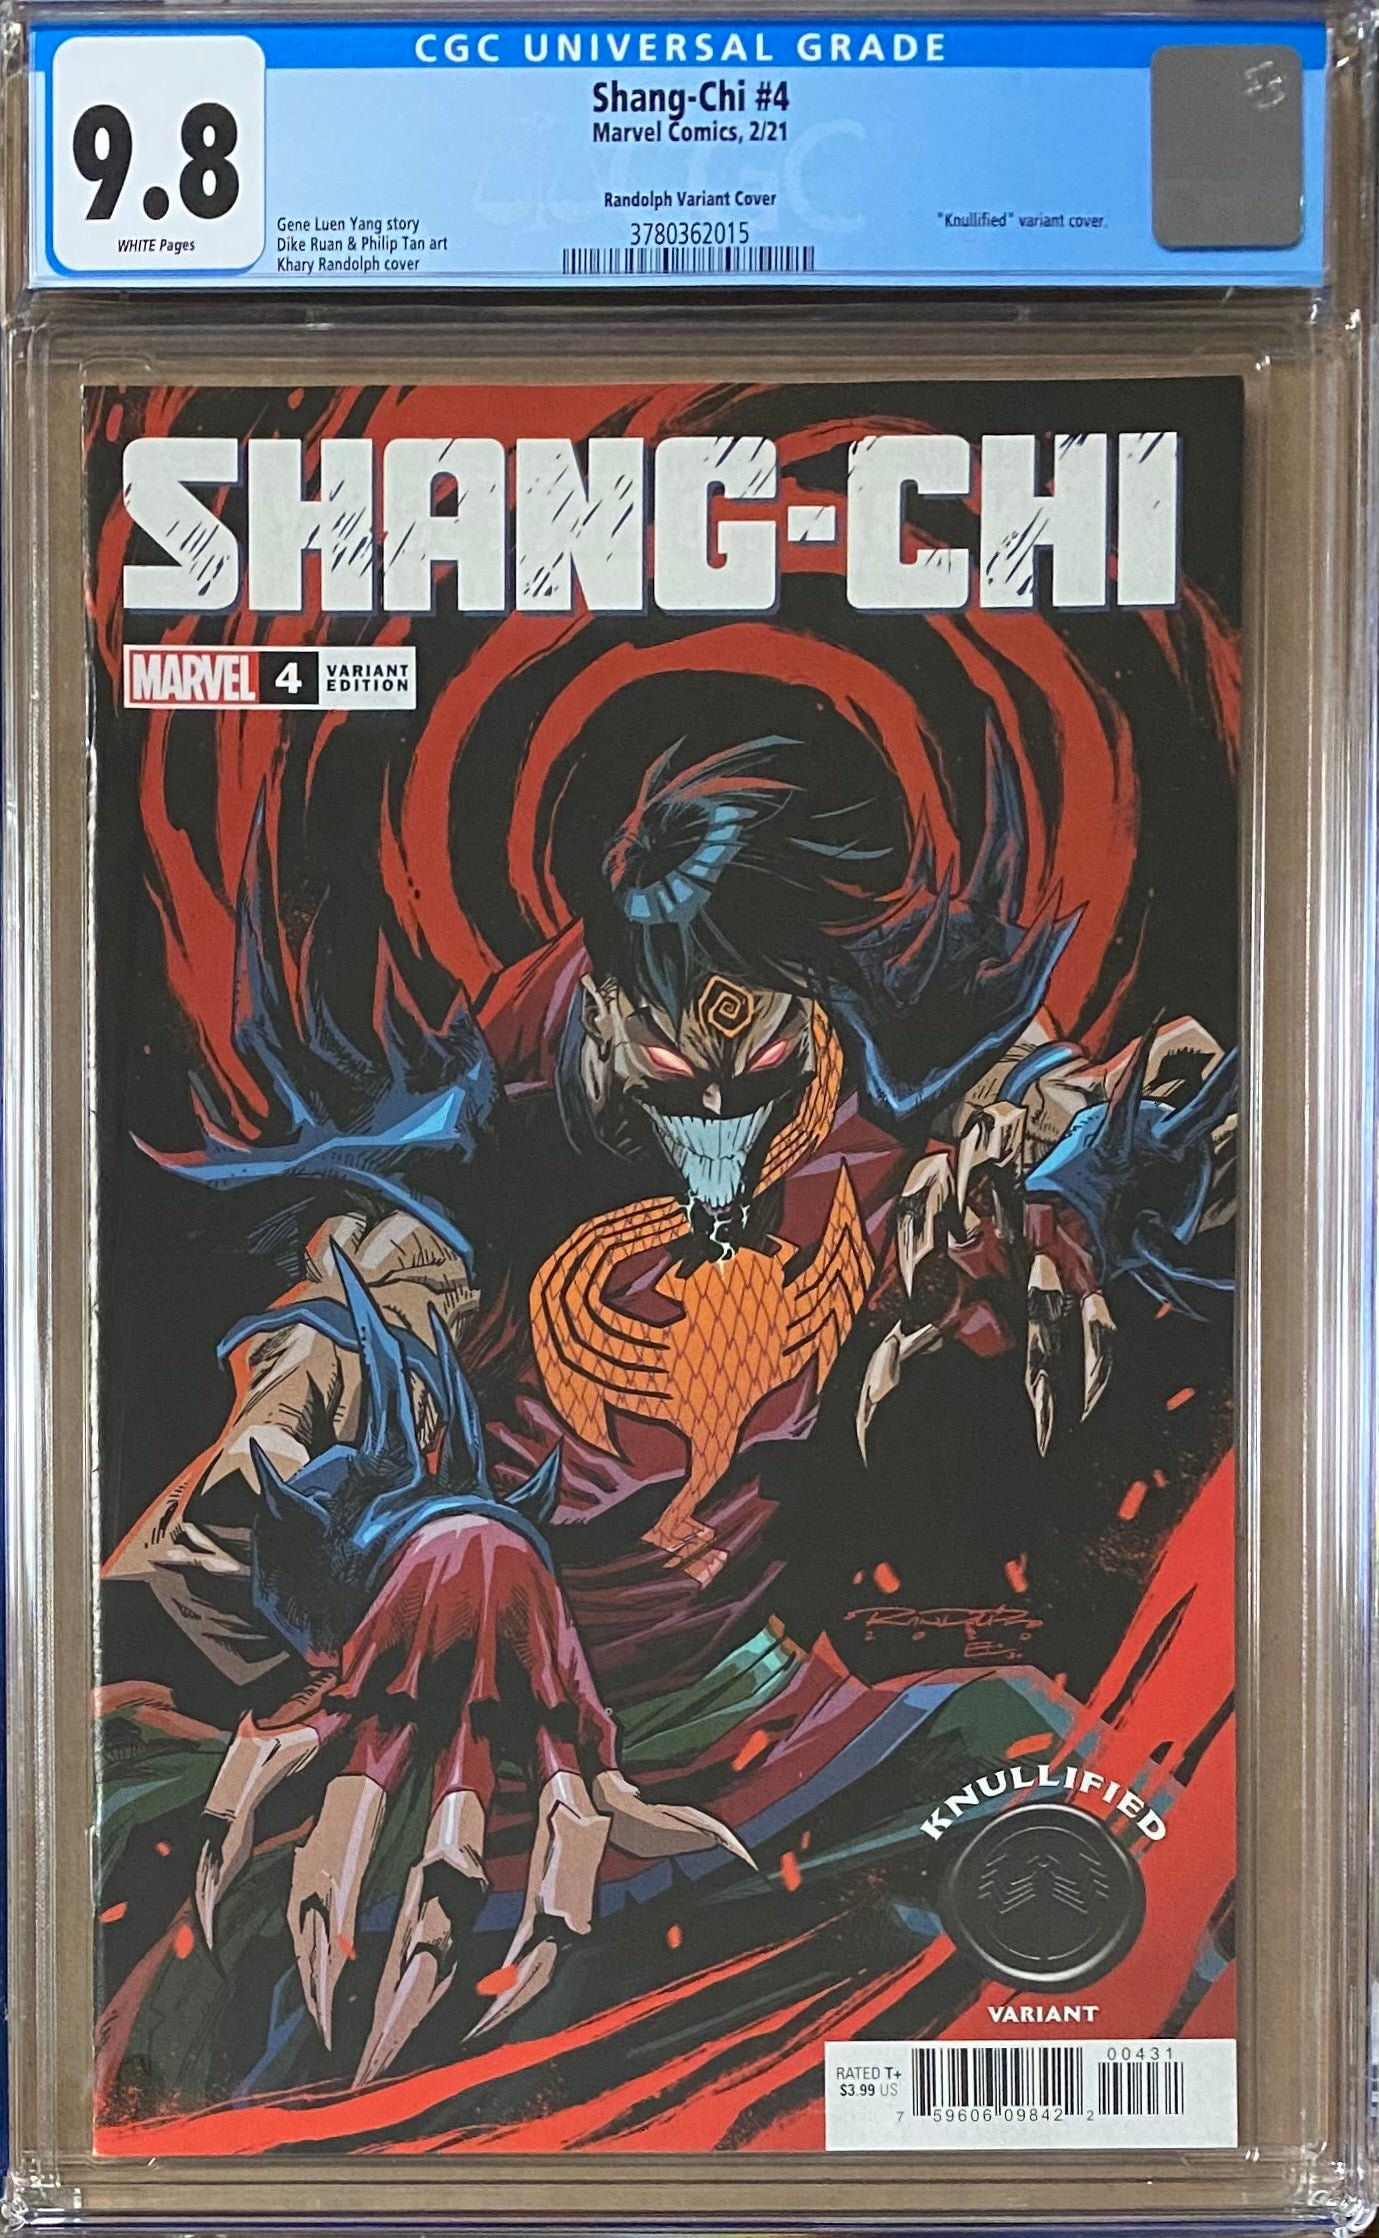 Shang-Chi #4 "Knullified" Variant CGC 9.8